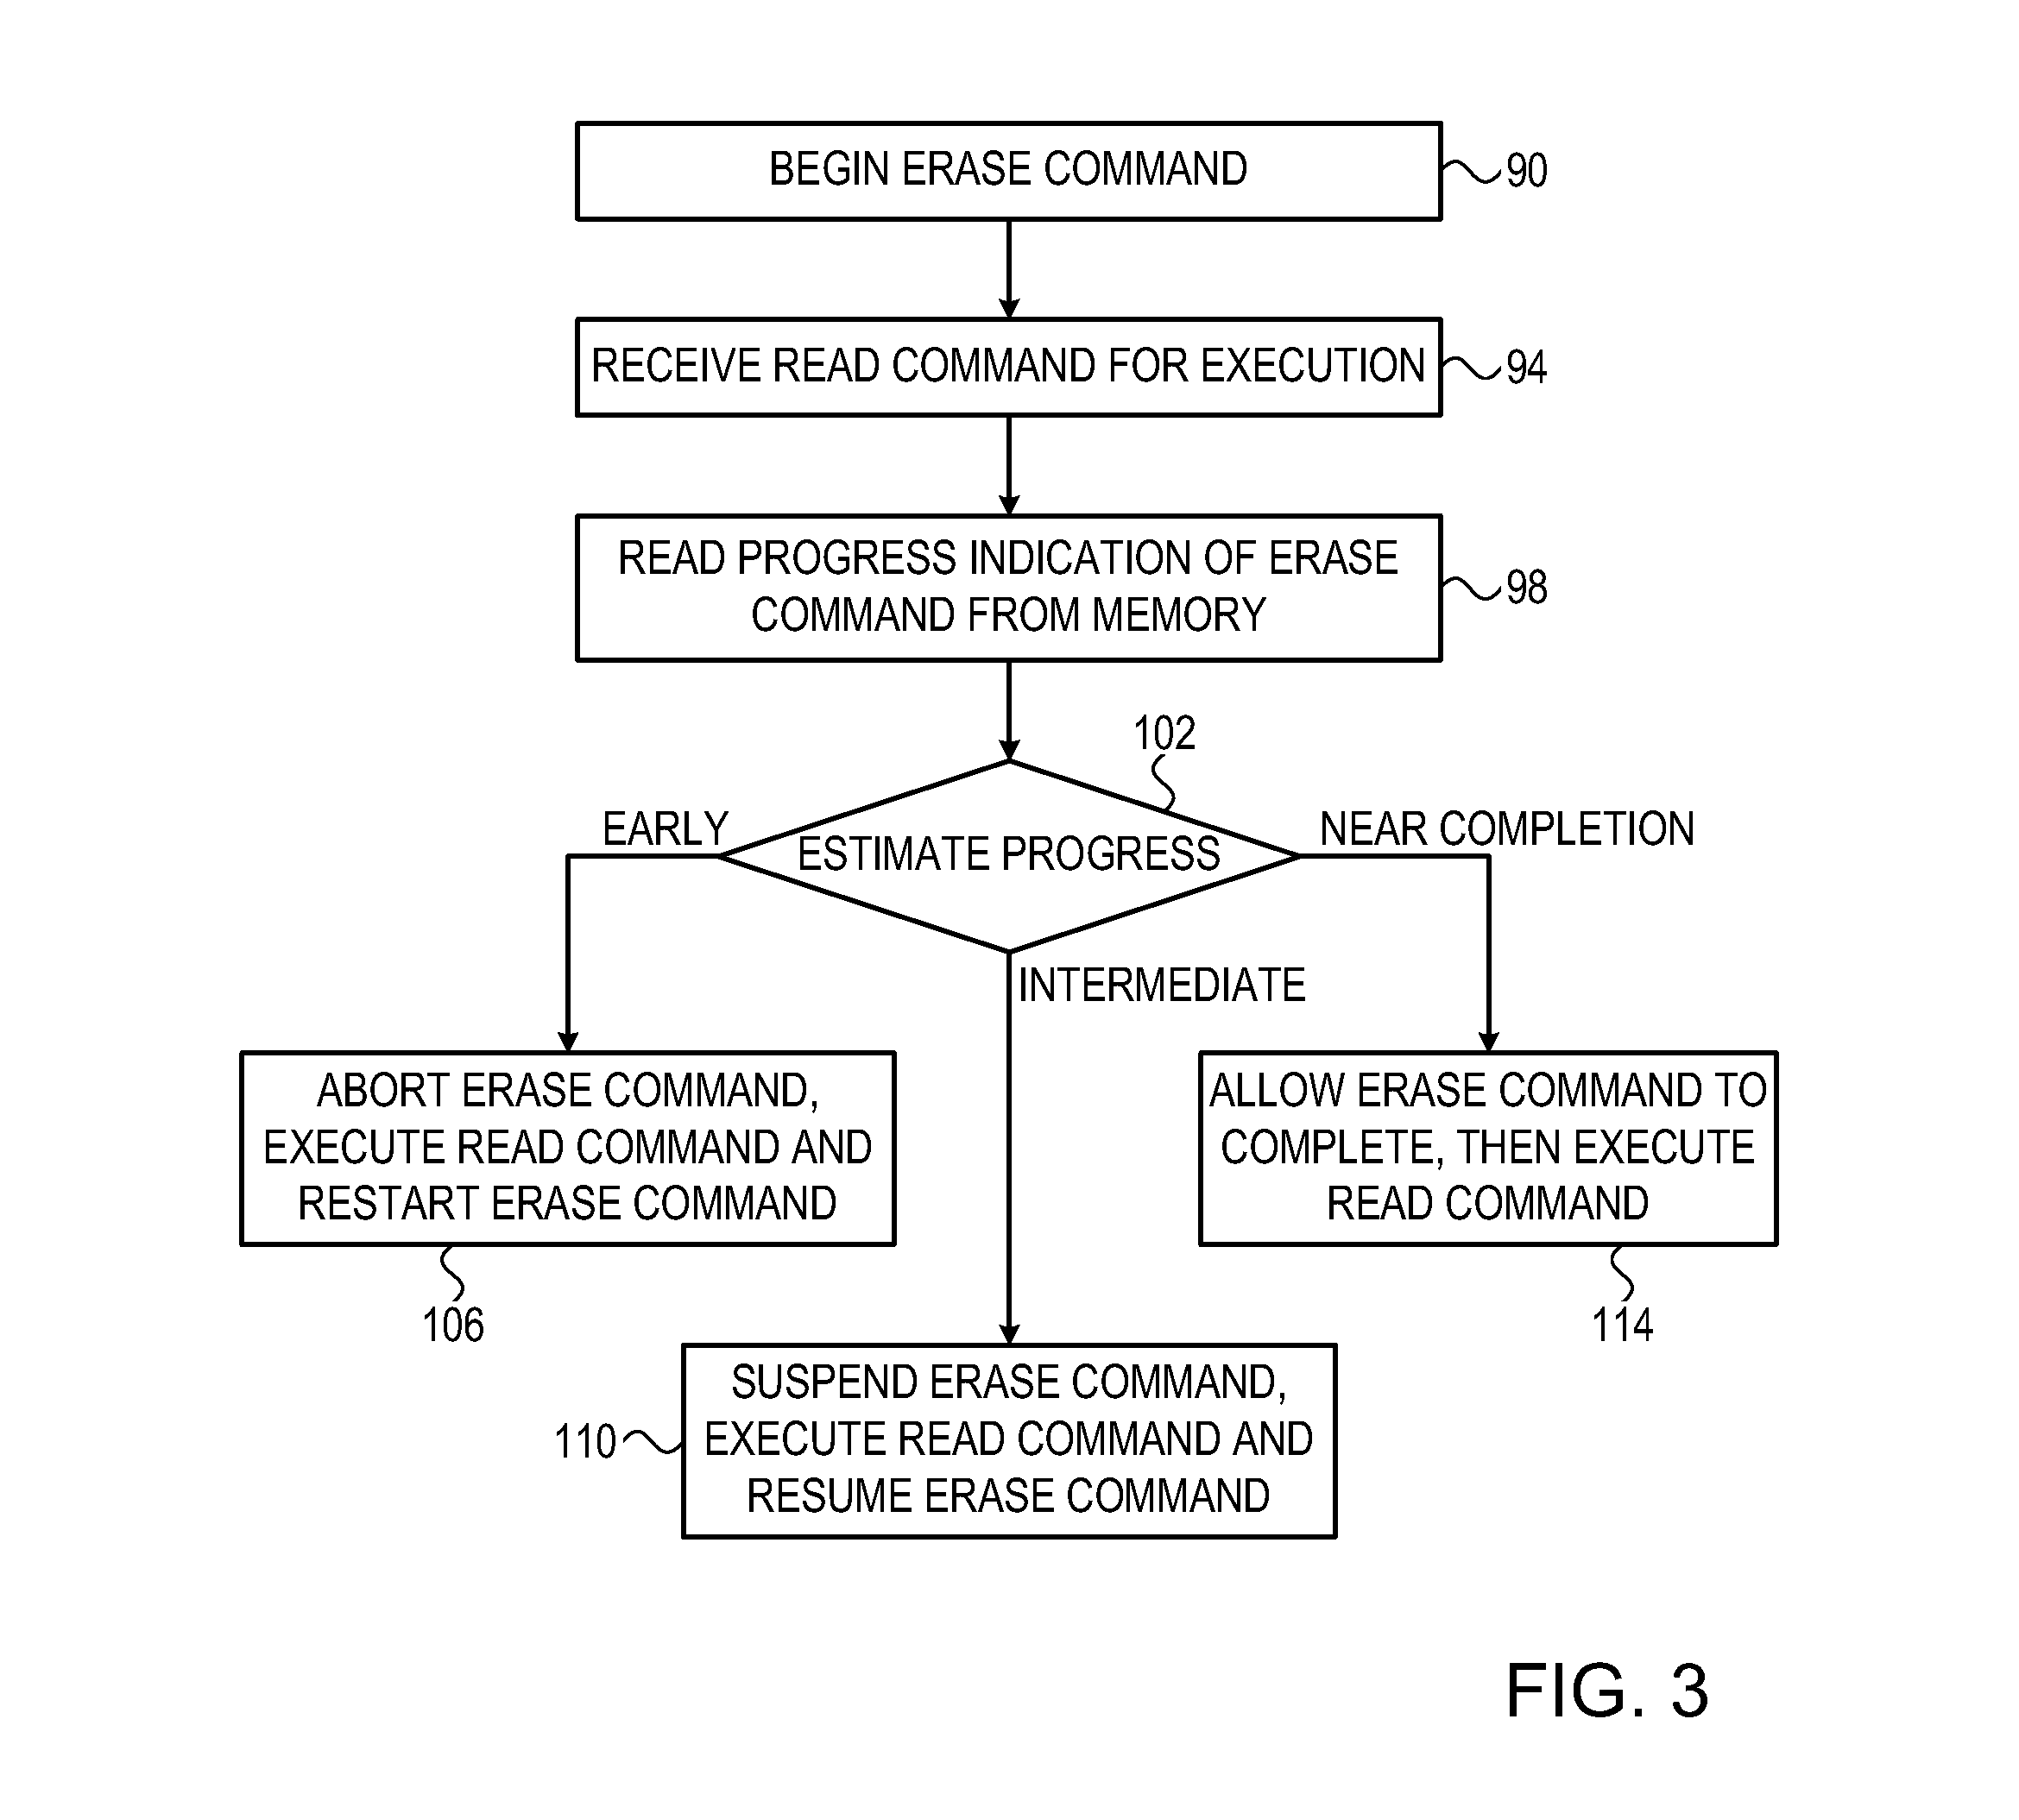 Efficient suspend-resume operation in memory devices